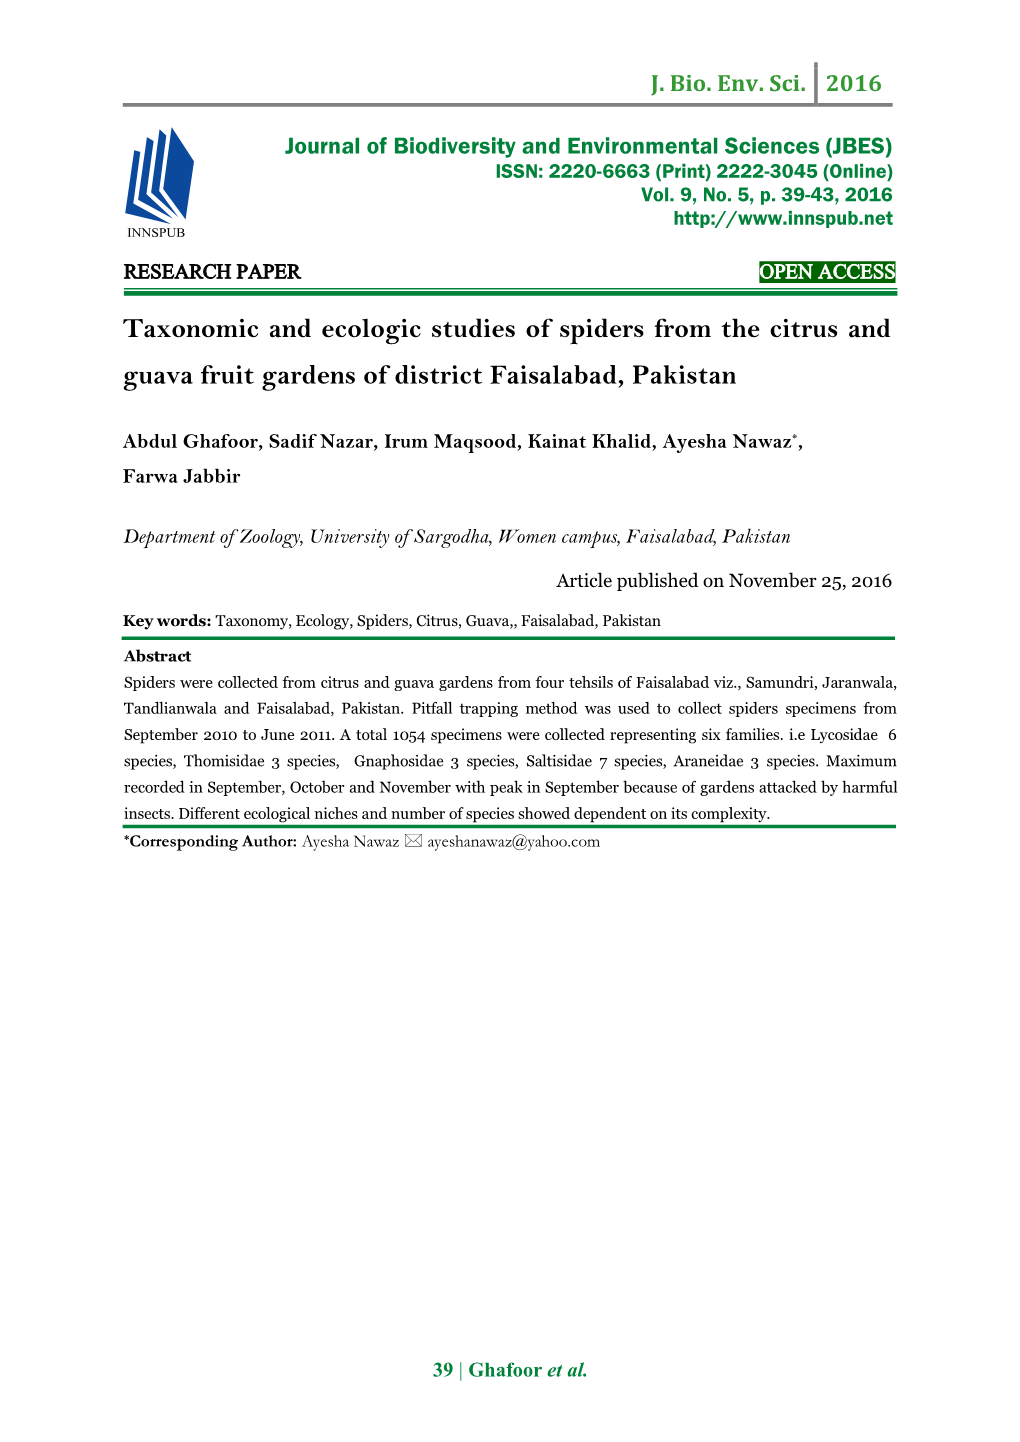 Taxonomic and Ecologic Studies of Spiders from the Citrus and Guava Fruit Gardens of District Faisalabad, Pakistan